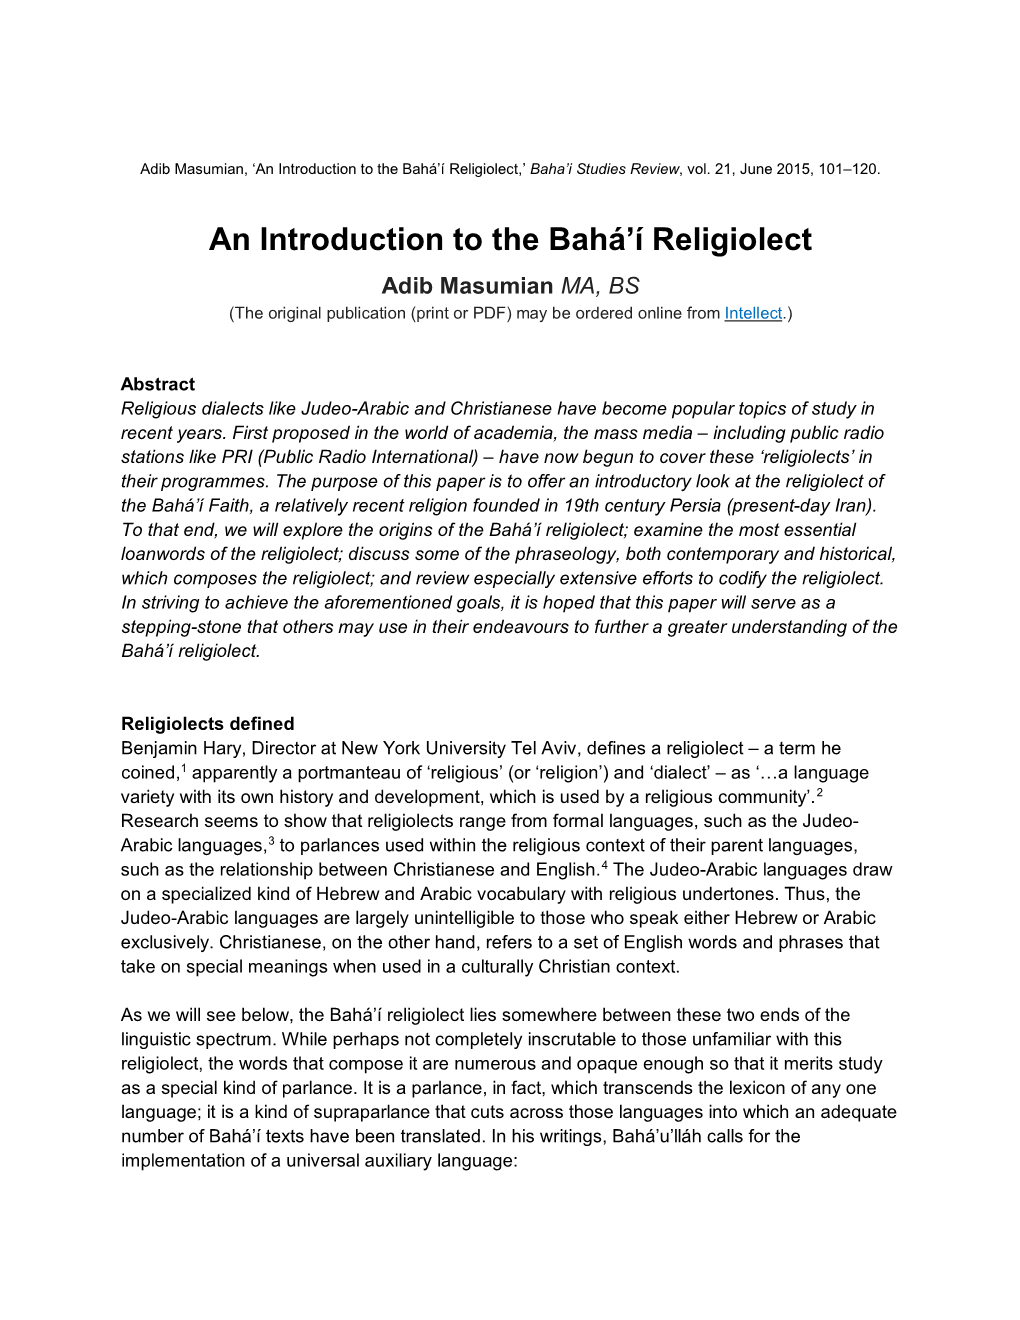 An Introduction to the Baháʼí Religiolect,’ Baha’I Studies Review, Vol